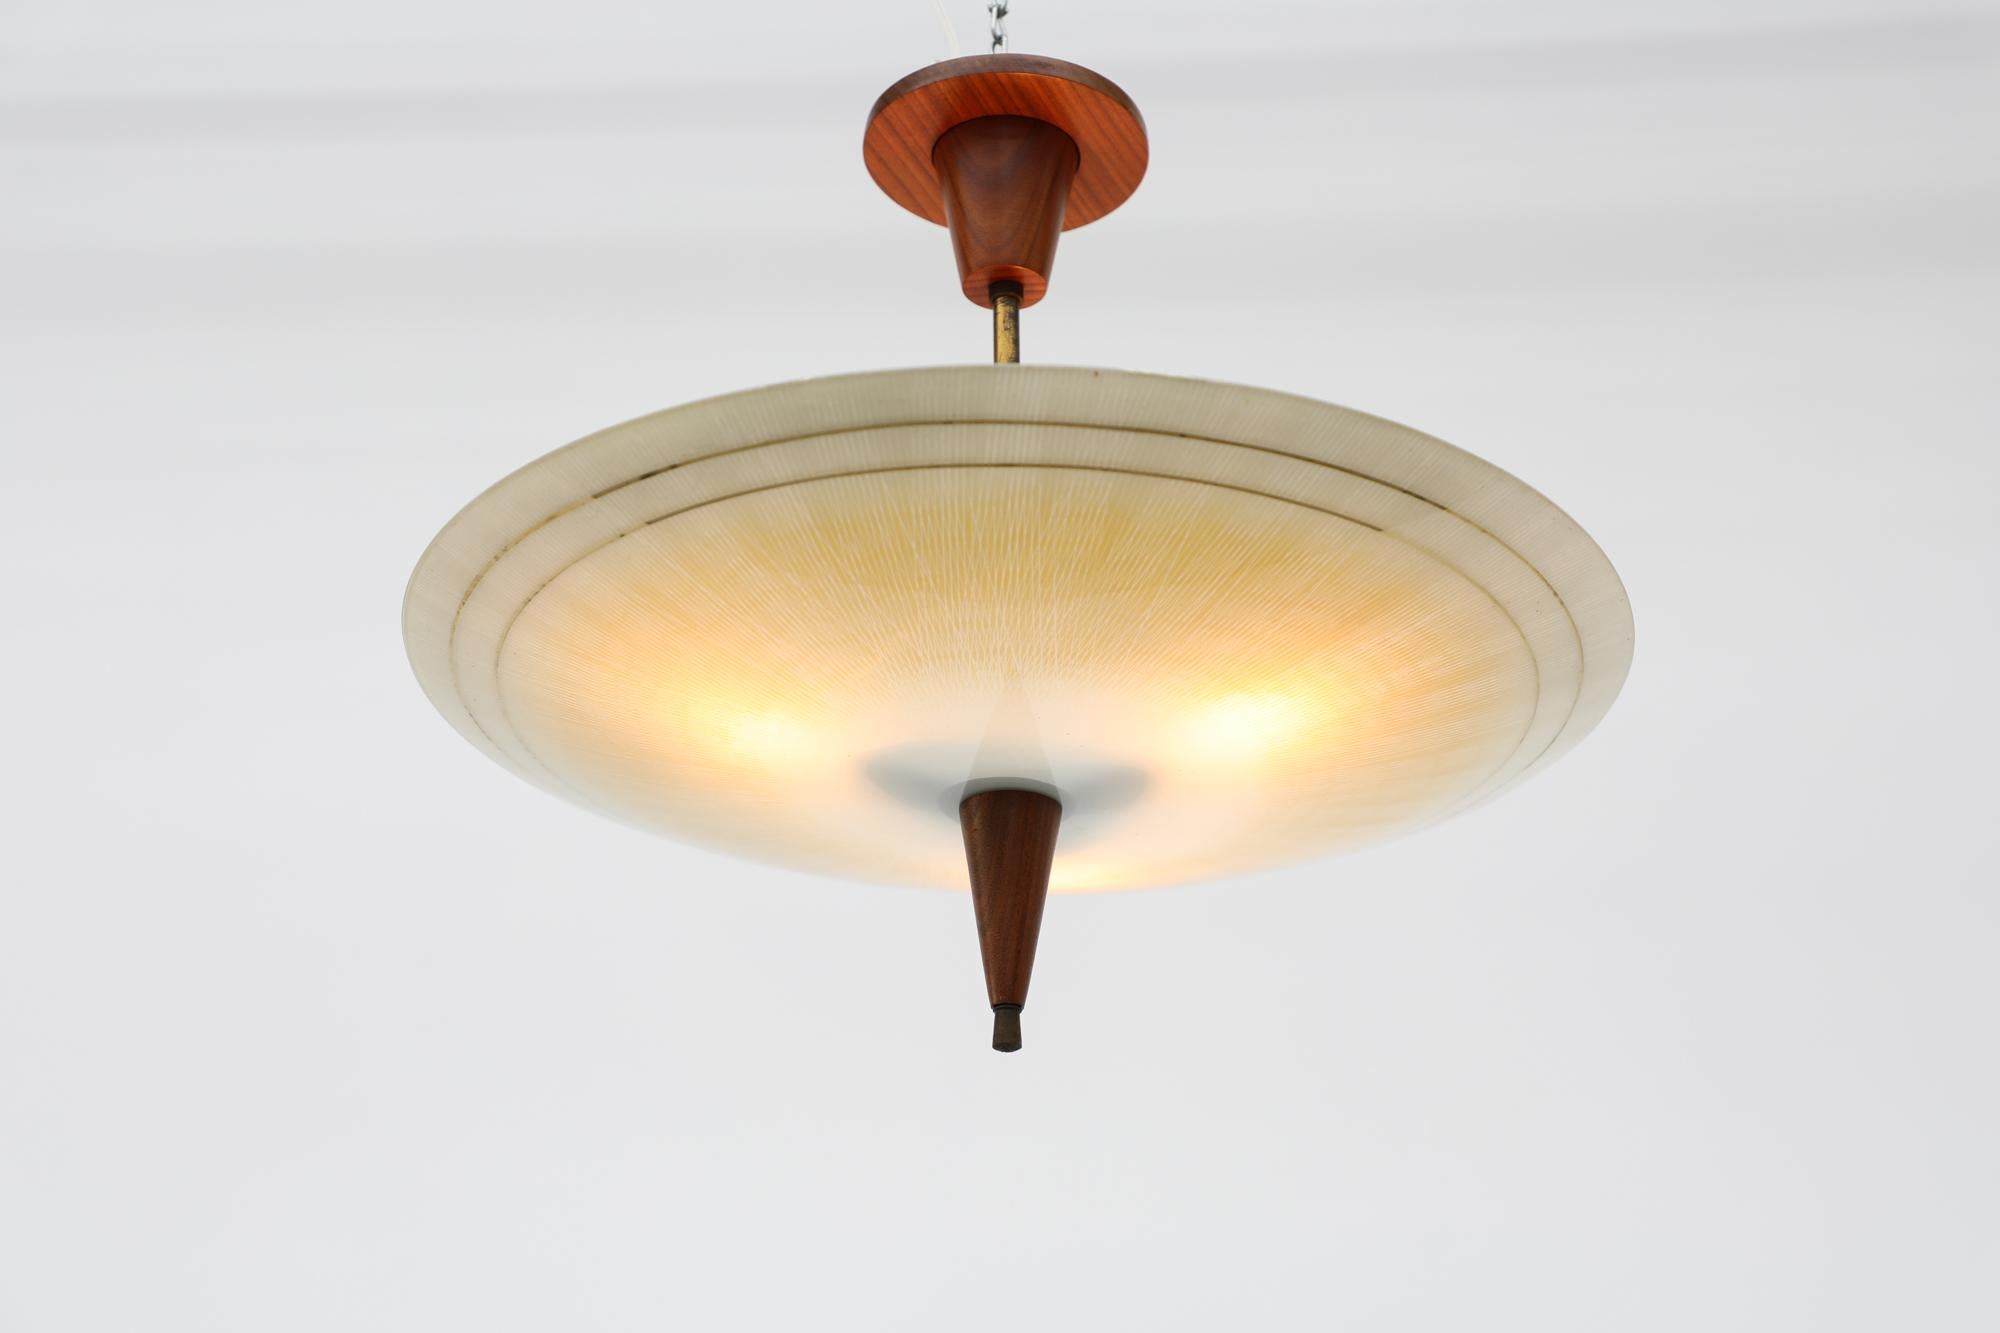 1950s Glass Rondelle Ceiling Pendant with Patterned Glass, Teak & Brass Details In Good Condition For Sale In Los Angeles, CA